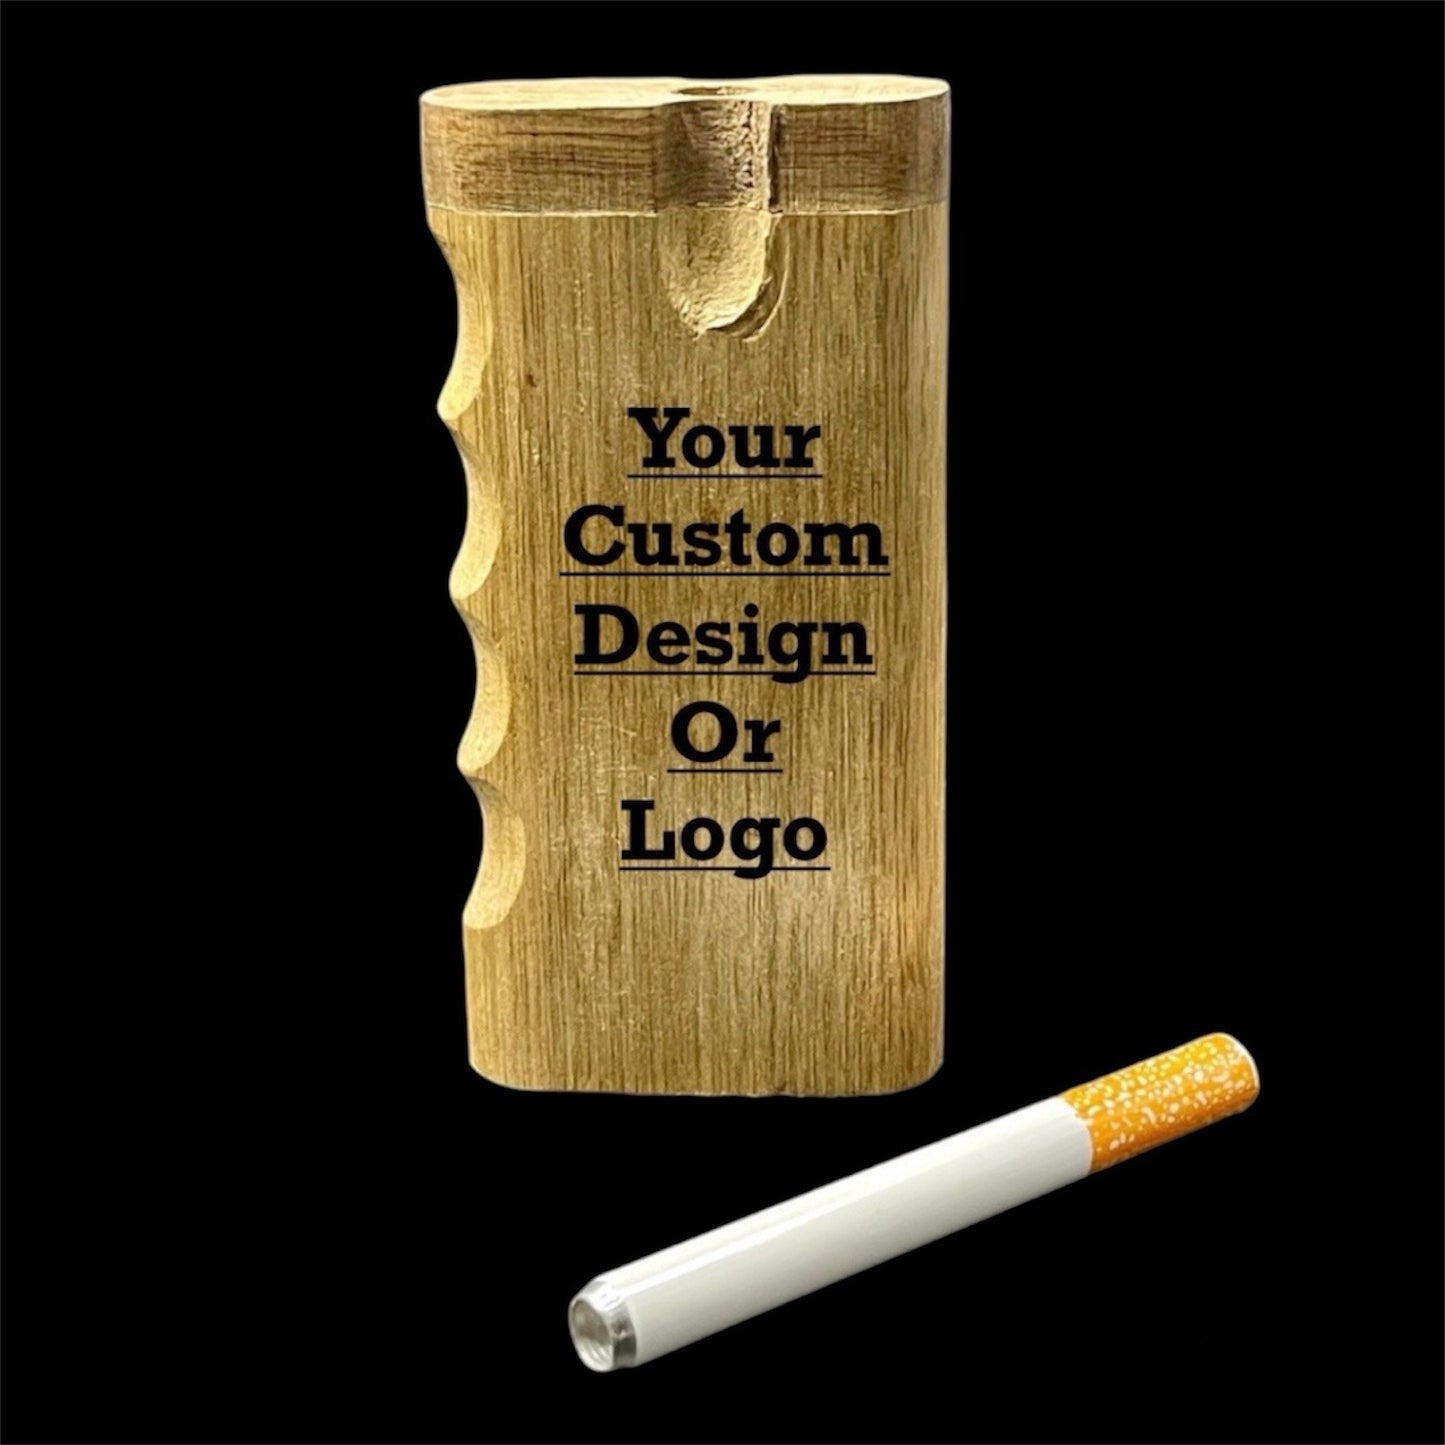 Customize your wooden dugout